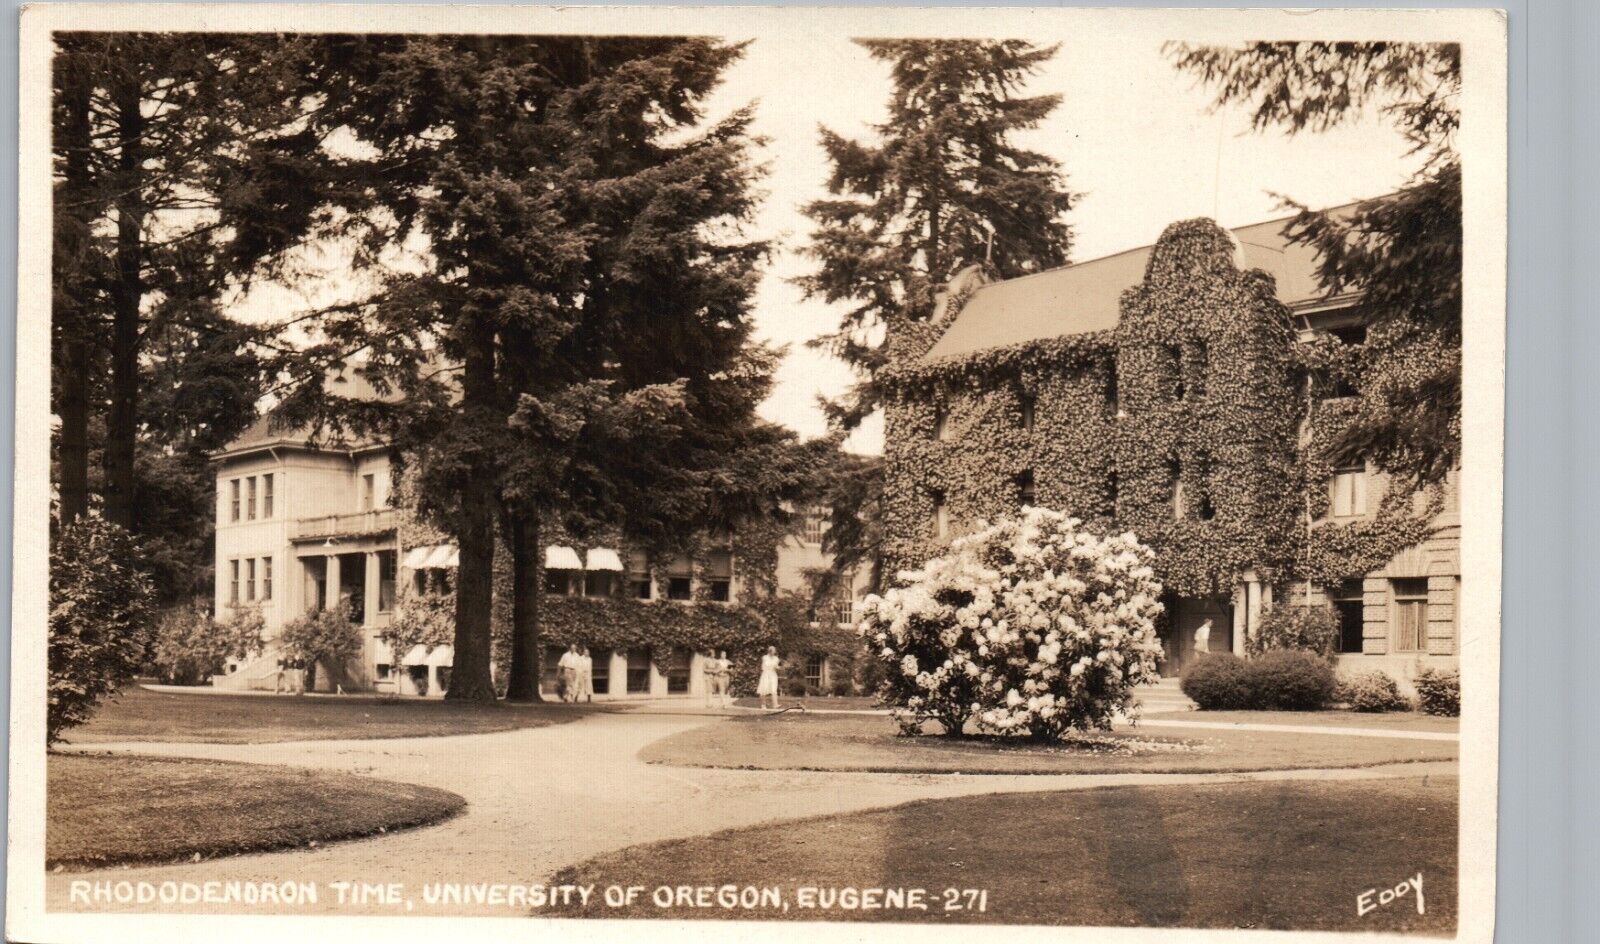 UNIVERSITY OF OREGON RHODODENDRON TIME eugene or real photo postcard rppc